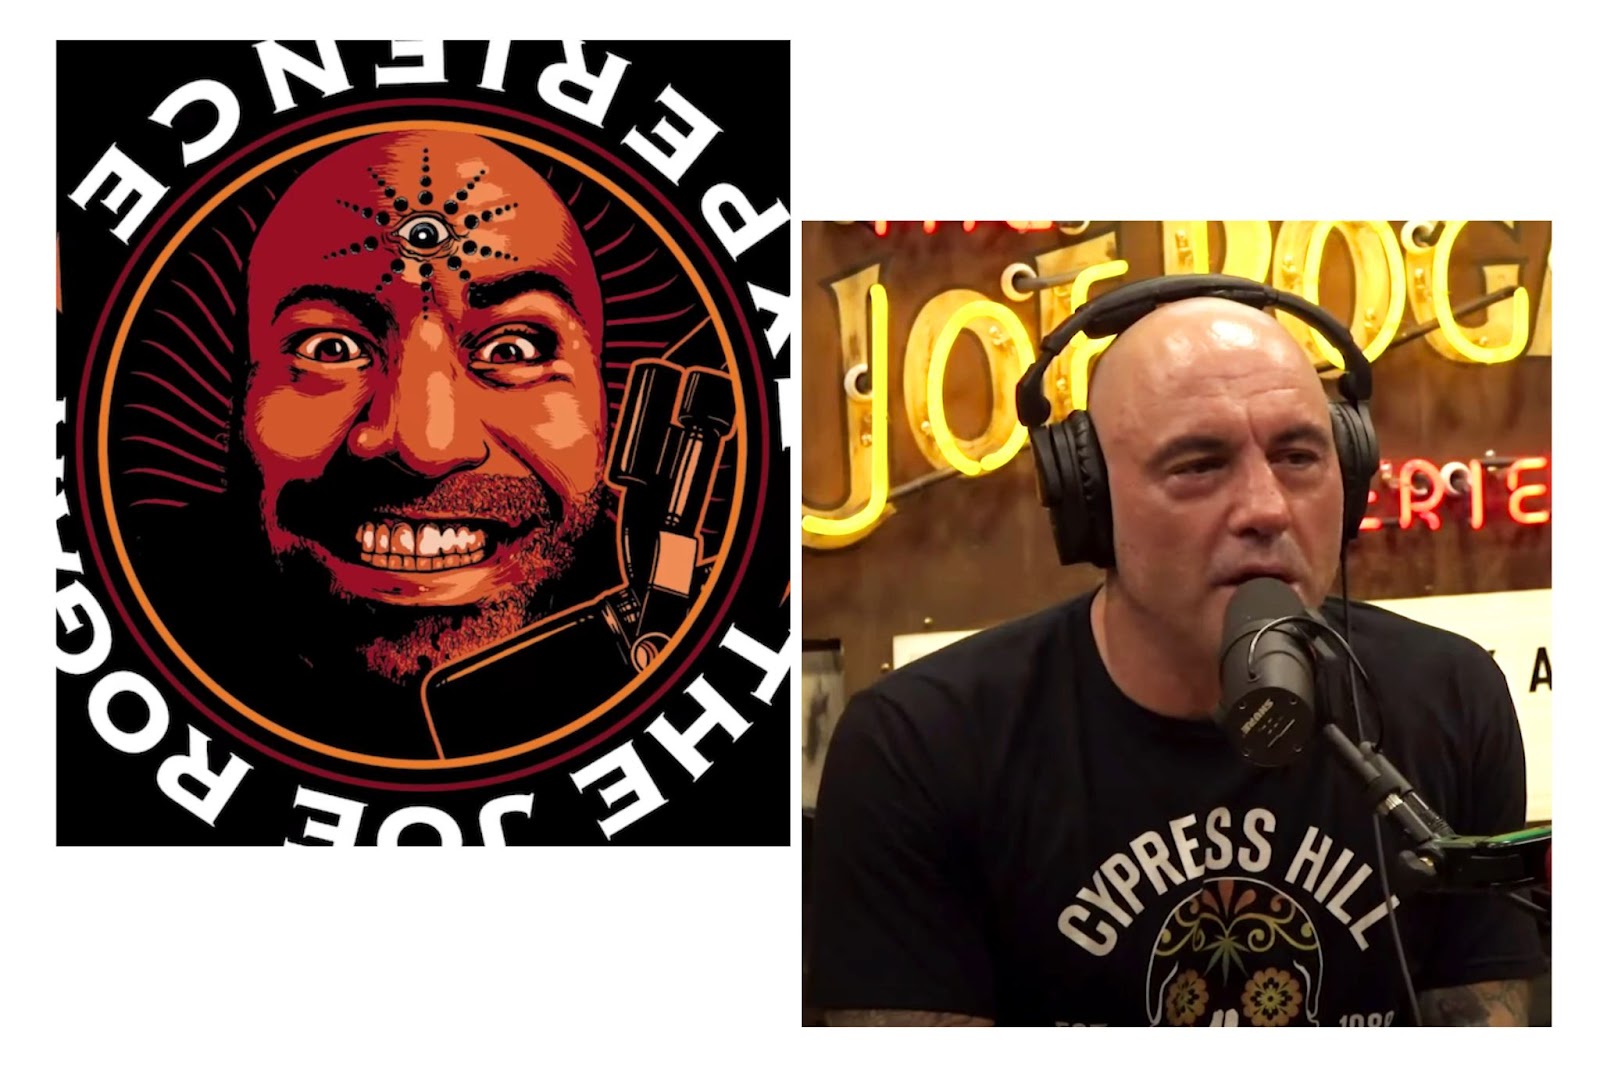 image cover of interview podcast The Joe Rogan Experience and the photo of the host of the podcast, Joe Rogan